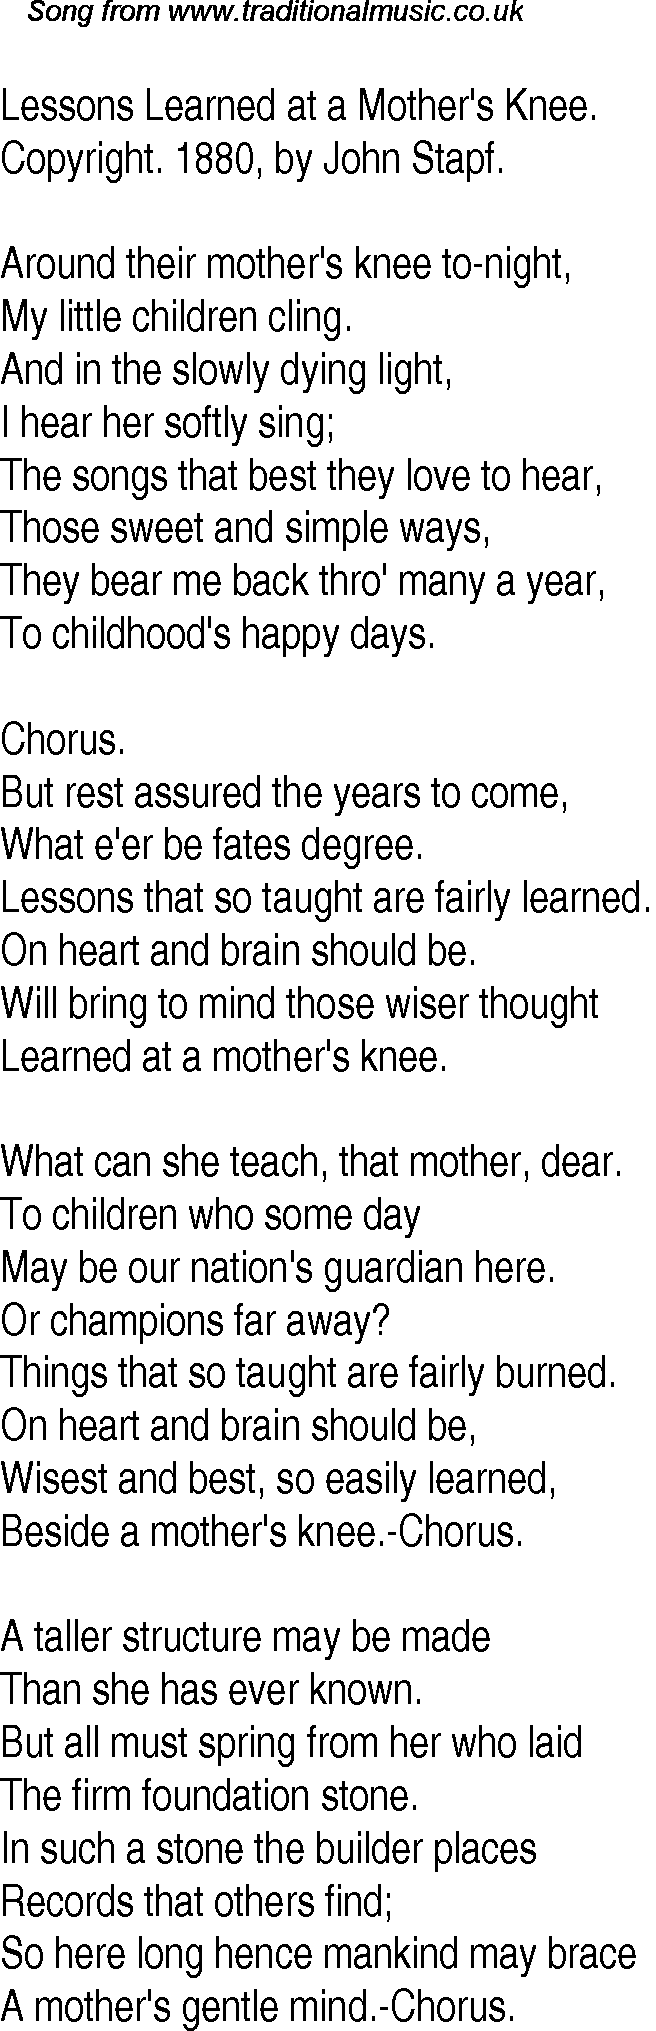 Old Time Song Lyrics For 14 Lessons Learned At A Mothers Knee